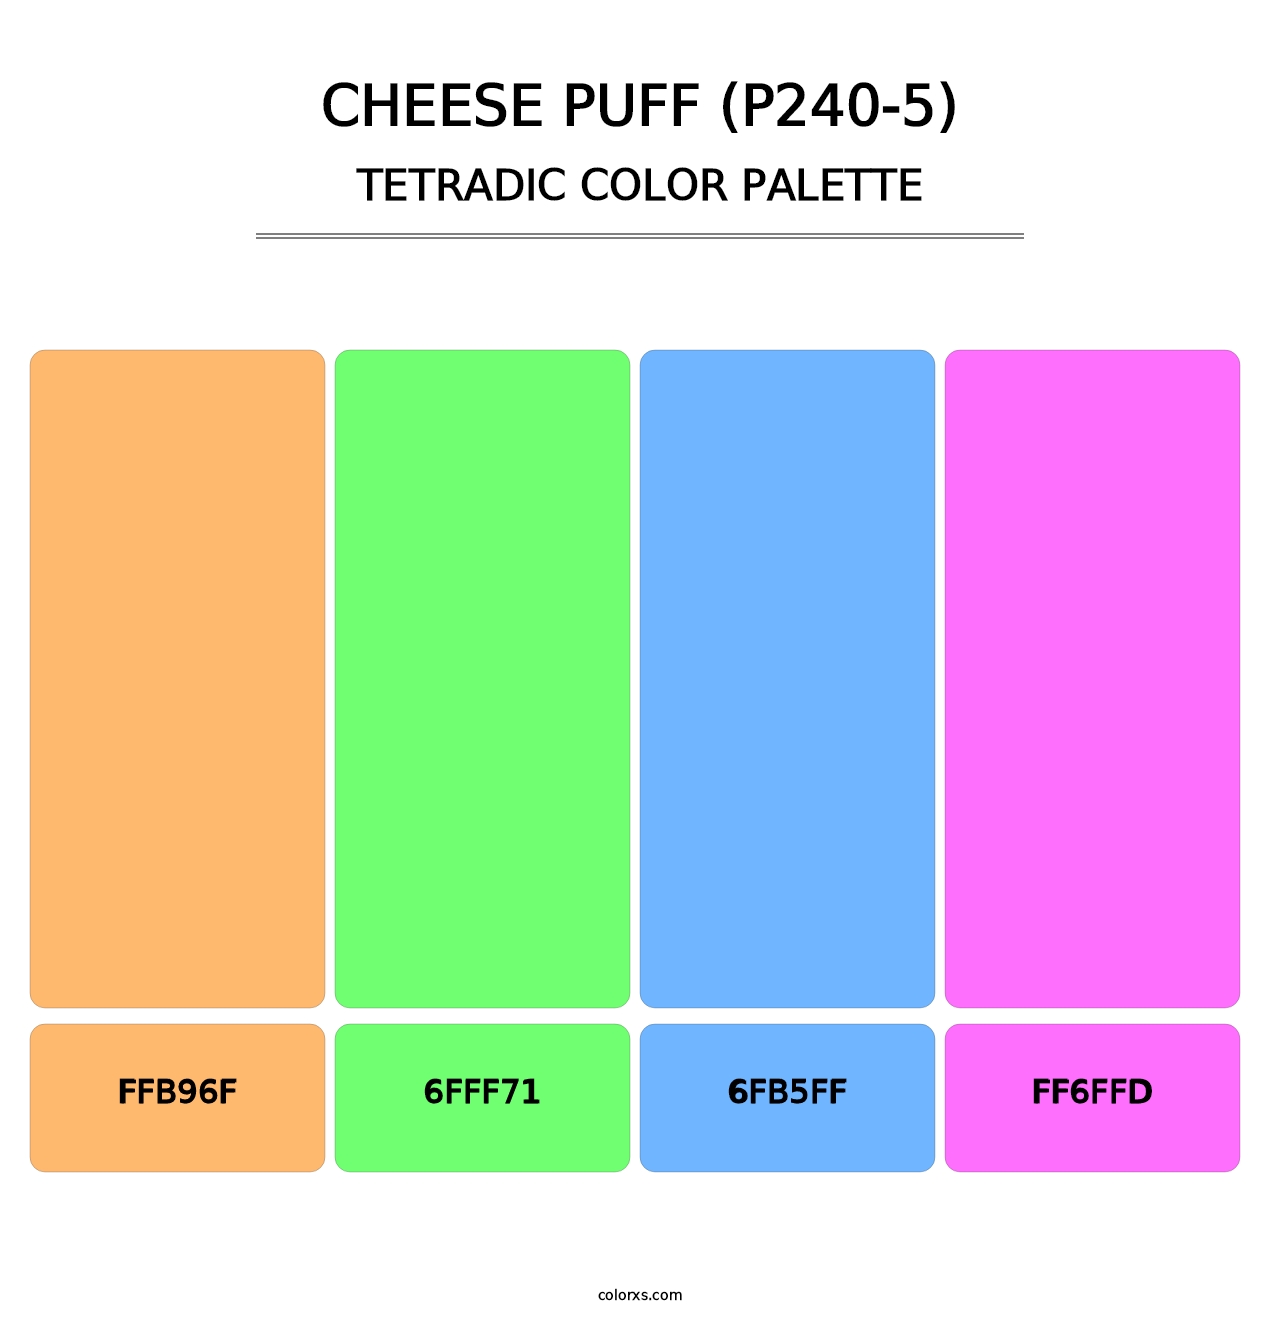 Cheese Puff (P240-5) - Tetradic Color Palette